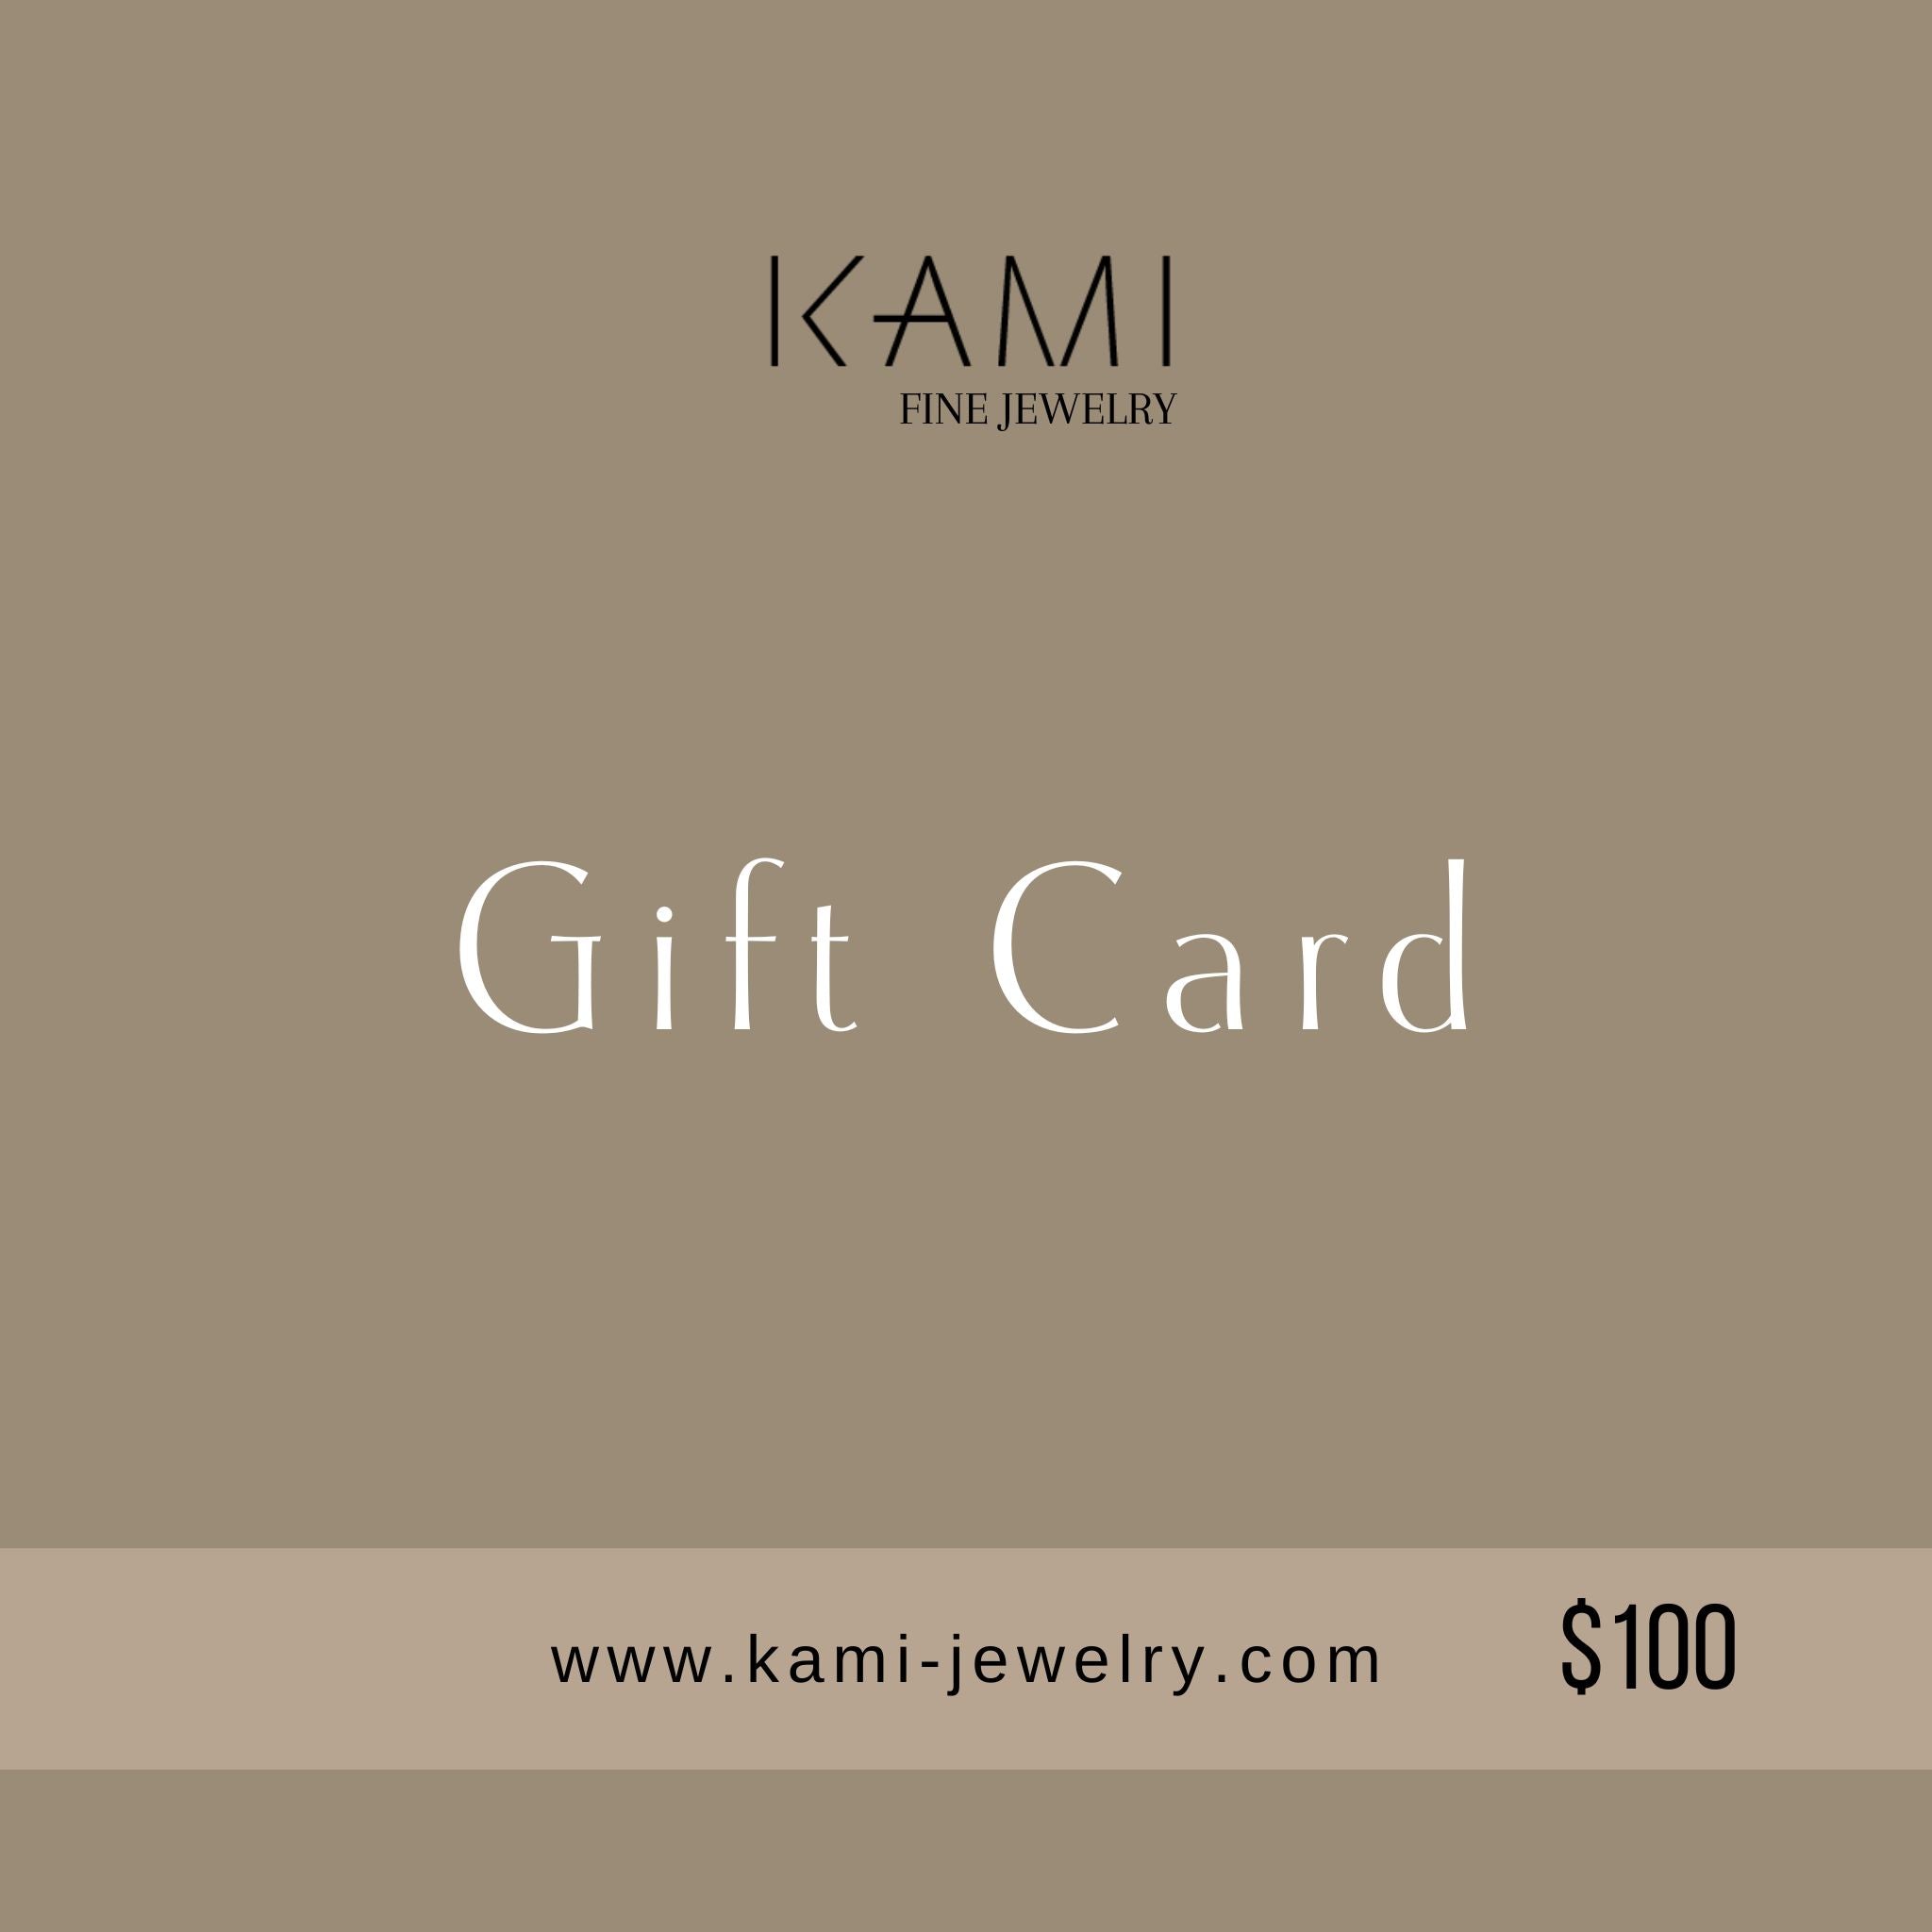 Kami-Jewelry Gift Card: The Perfect Gift for Any Jewelry Lover